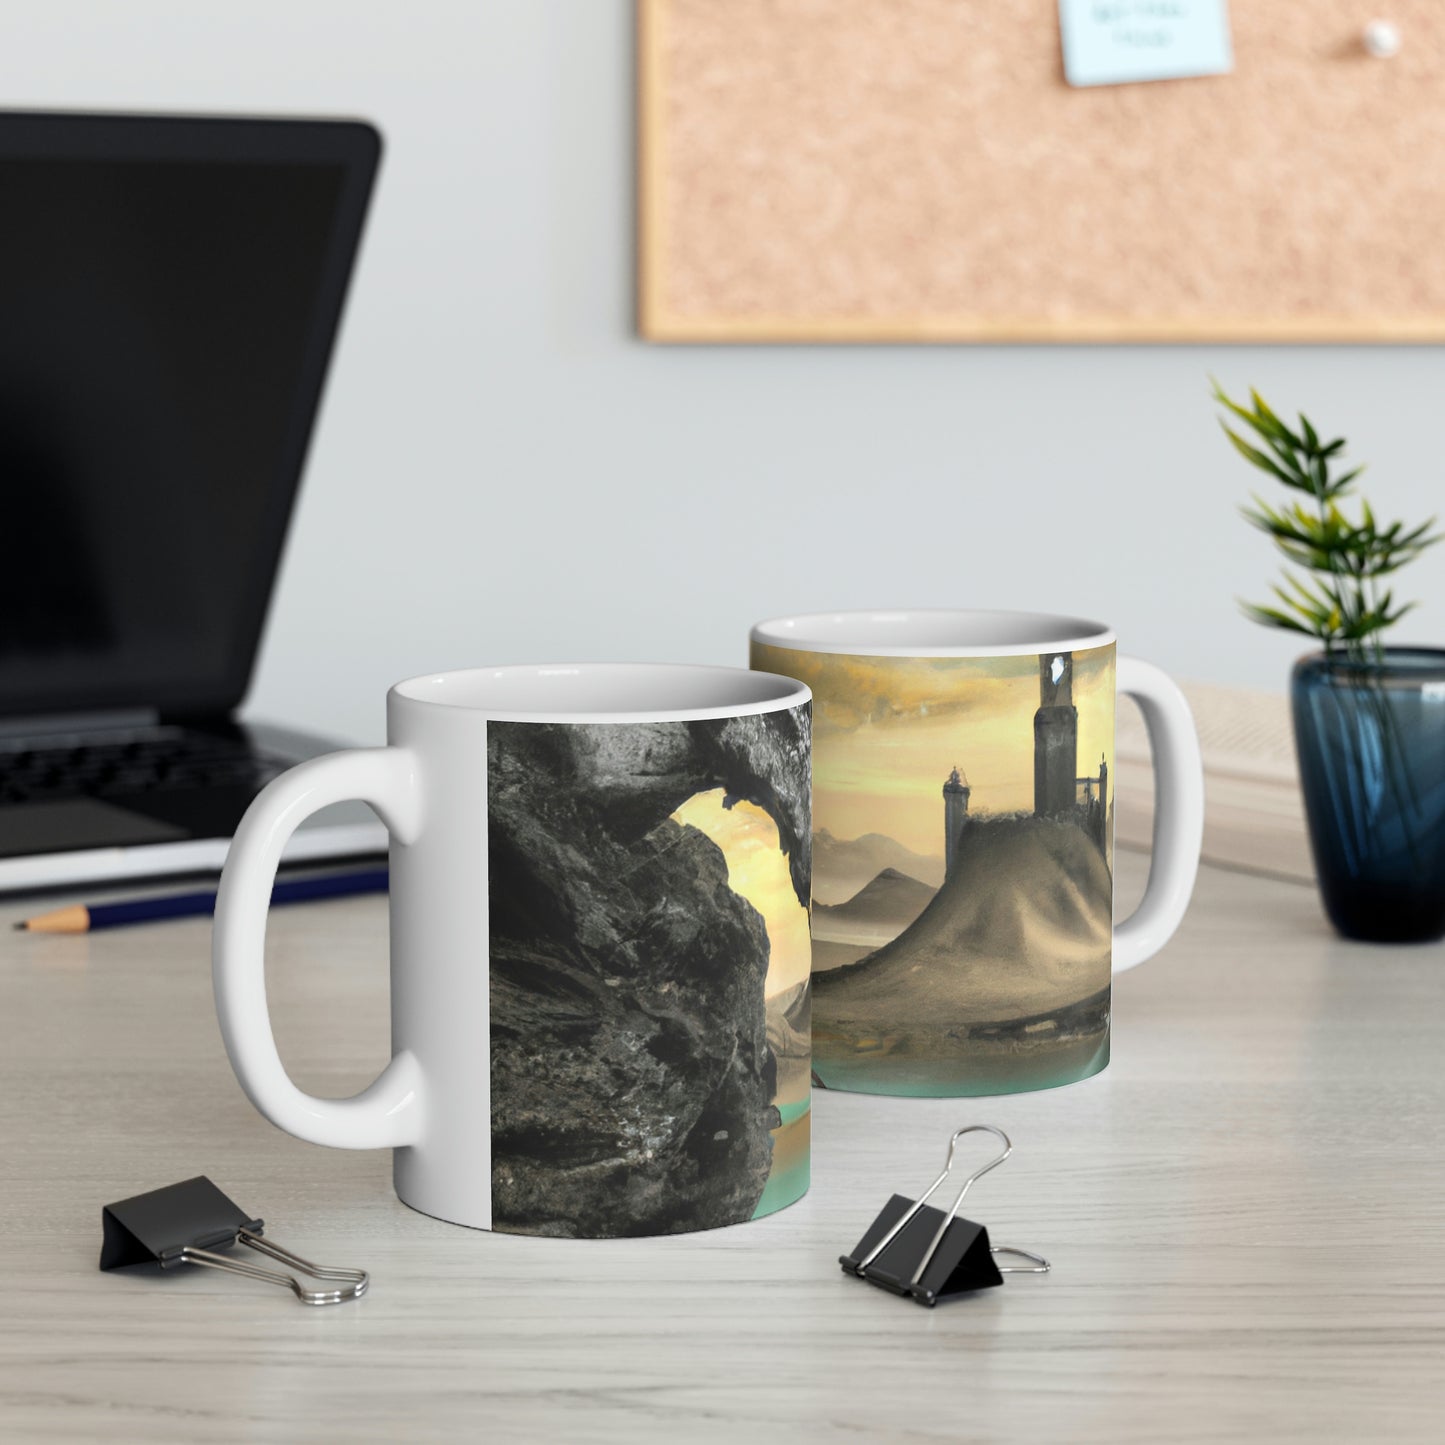 The Knight and the Dragon's Throne - The Alien Ceramic Mug 11 oz